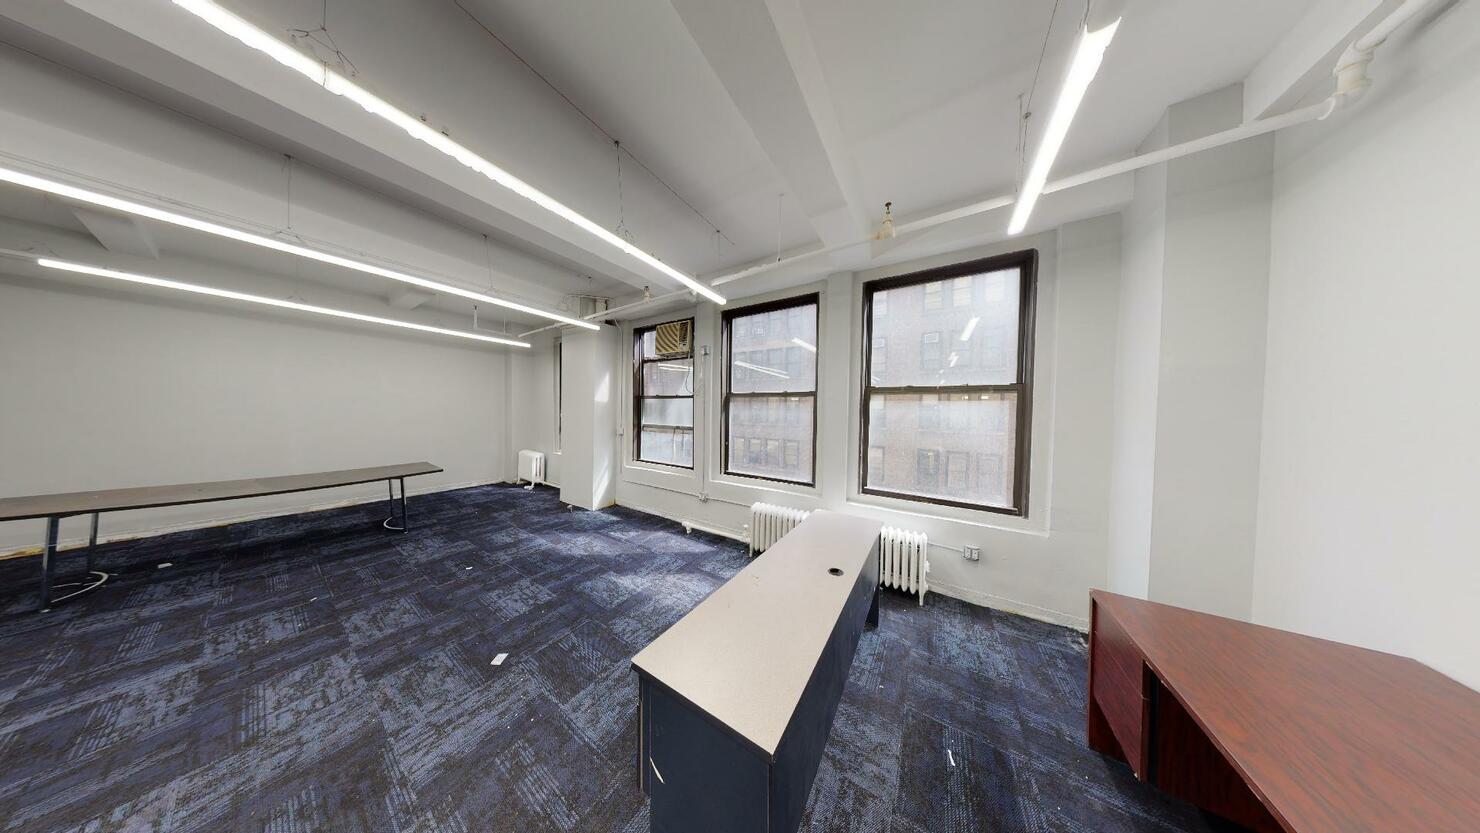 255 West 36th Street Office Space, 9th Floor - Large Windows